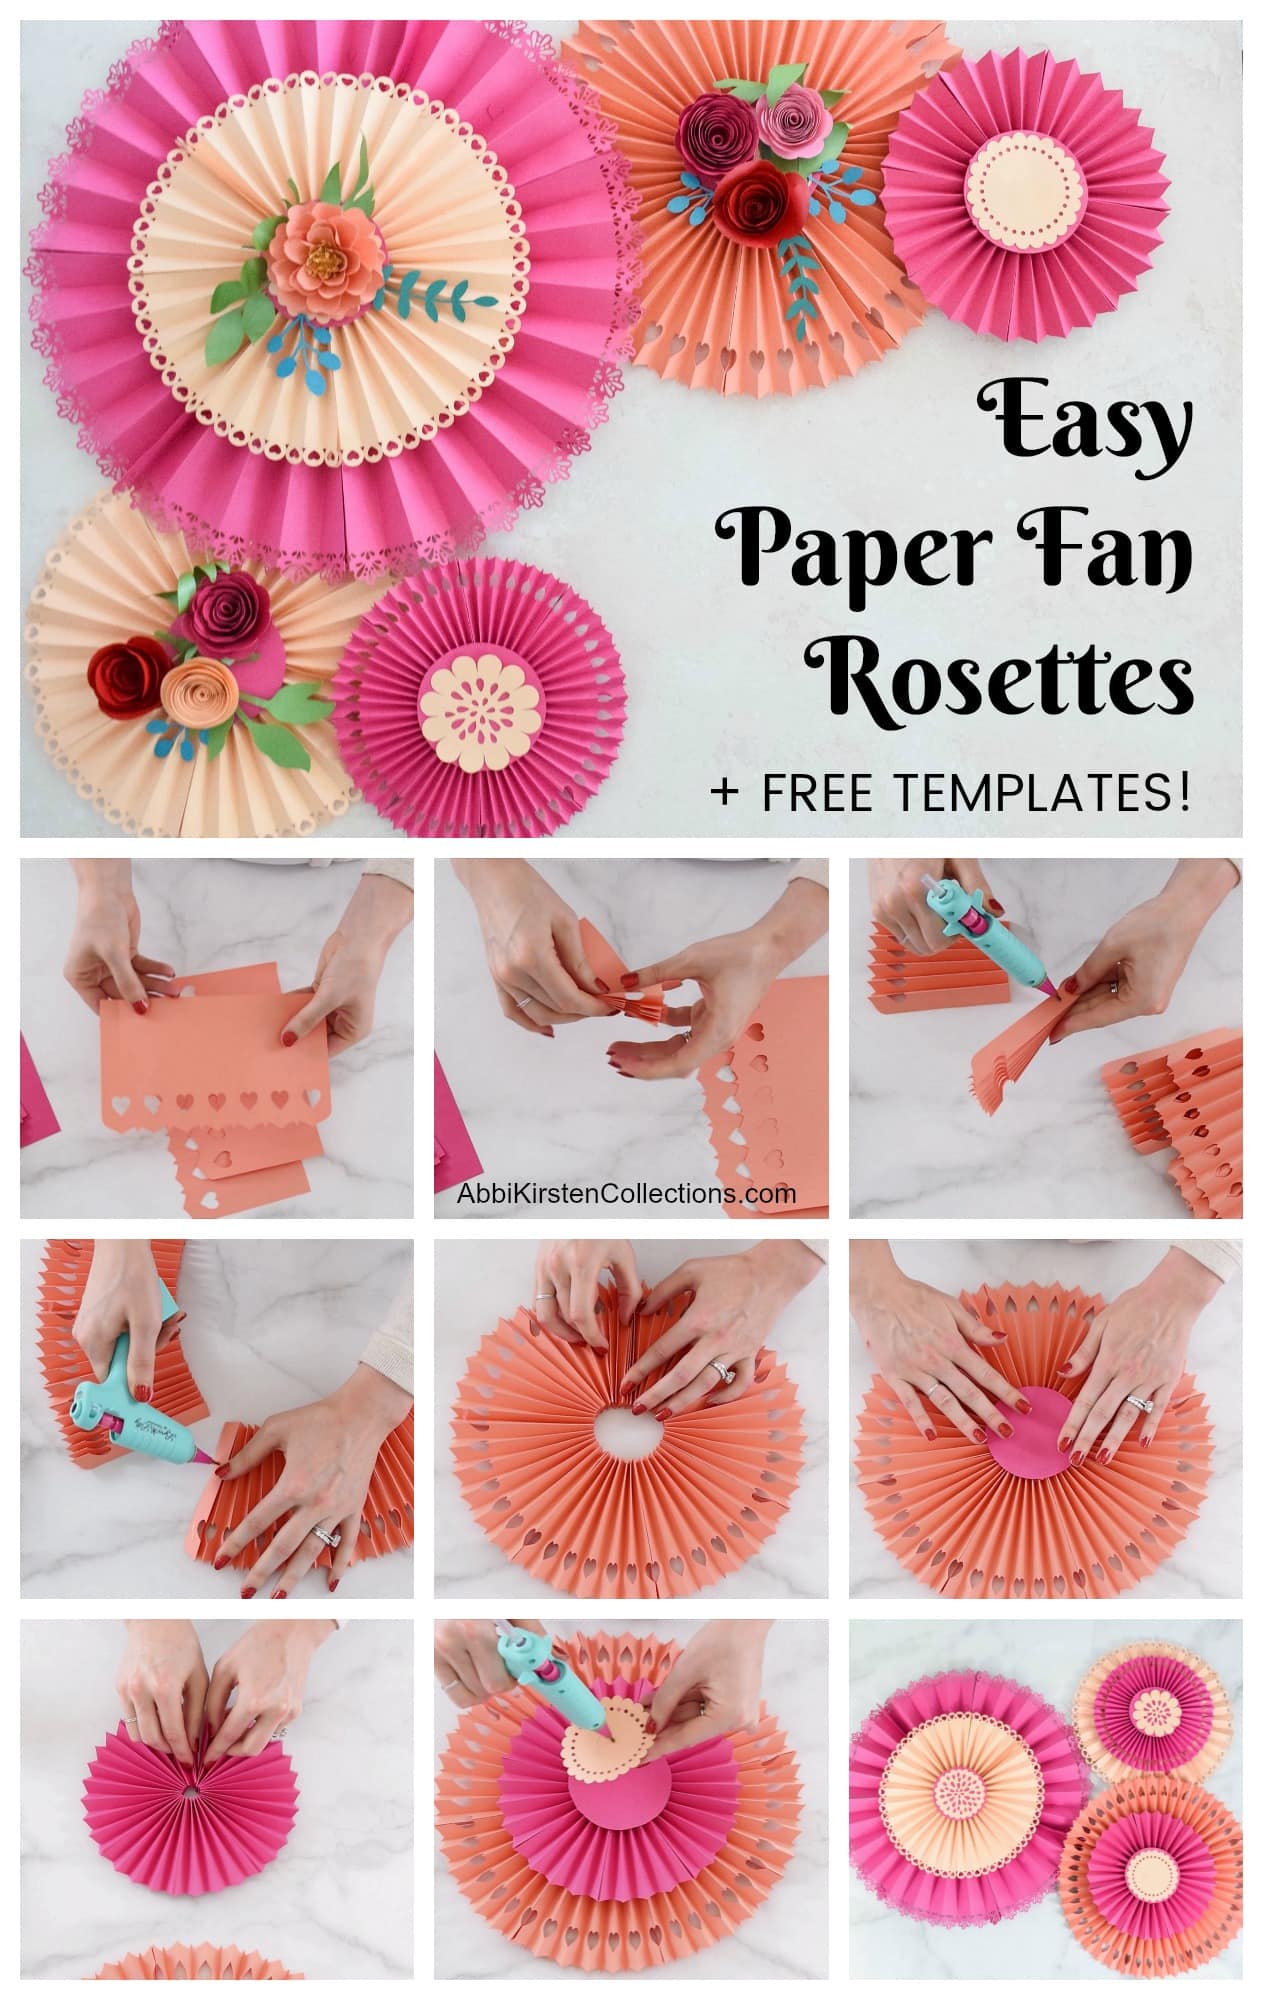 A graphic of 10 photos demonstrating how to make DIY paper rosette fans with a Cricut cutting machine. The text says, "Easy paper fan rosettes + Free Templates!"